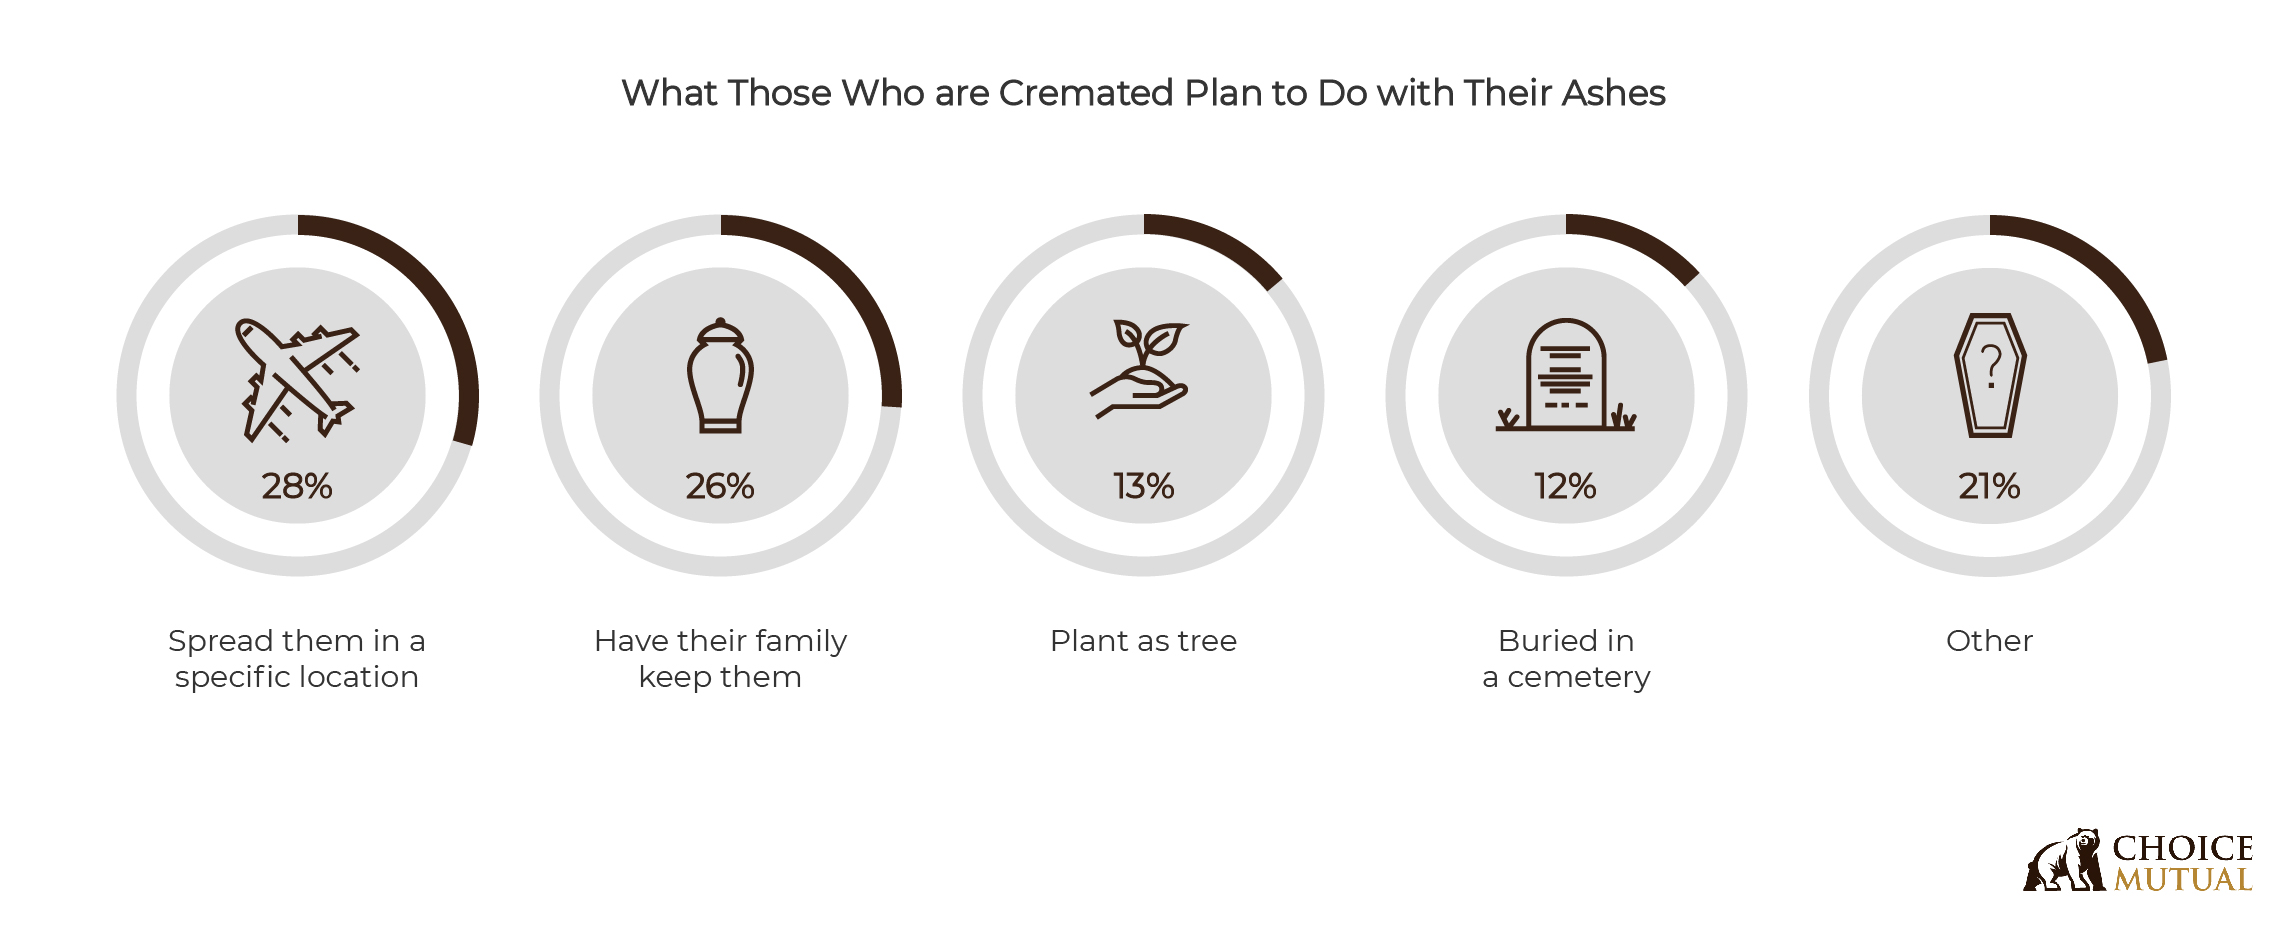 percentage breakdown showing five options of what people plan to do with their ashes after cremation